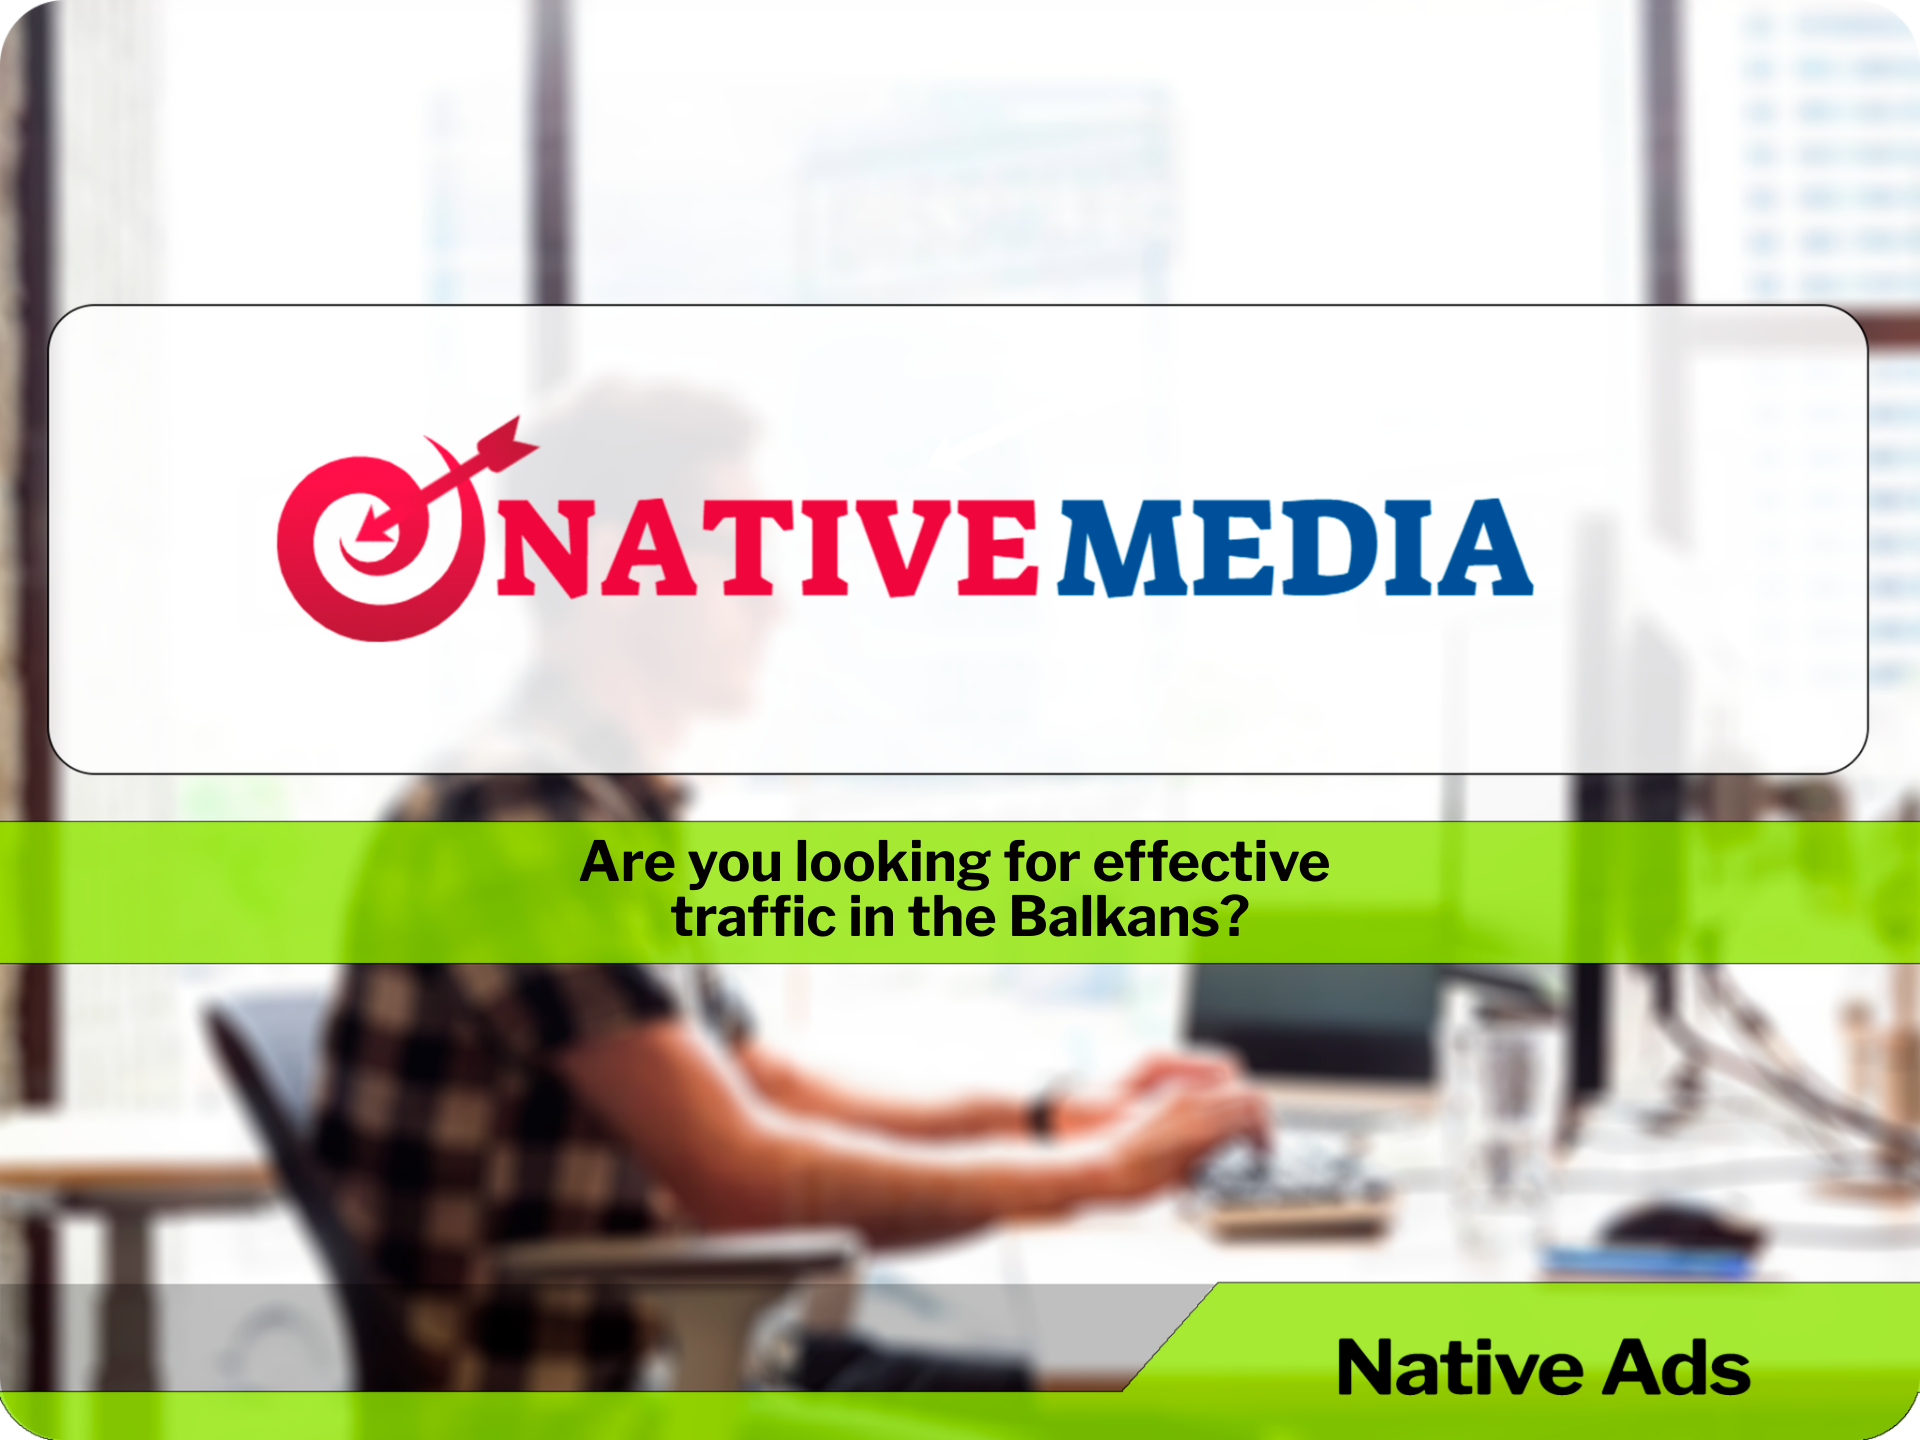 Are you looking for effective traffic in the Balkans? Native Media